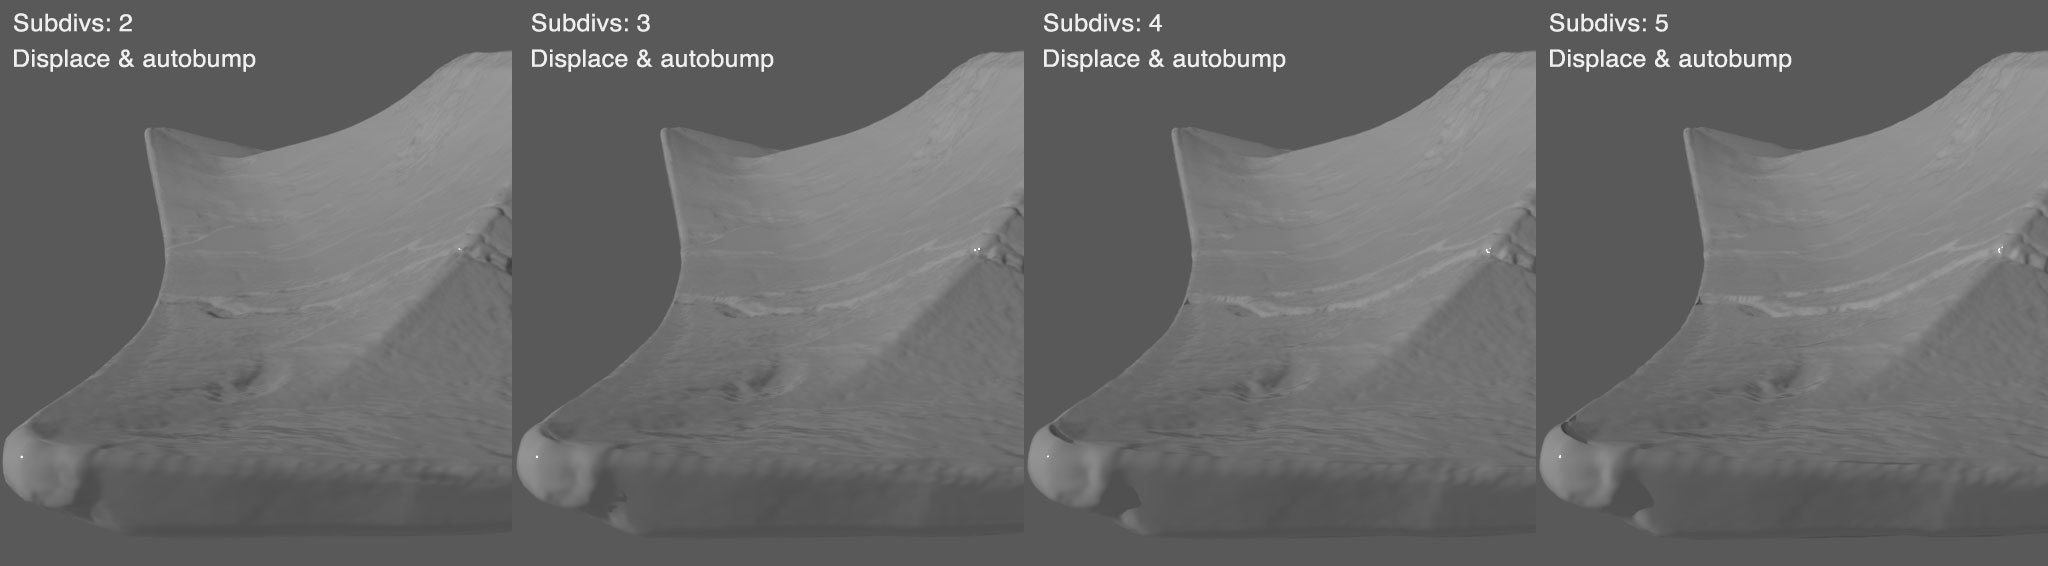 3 subdivisions with autobump seems to be sweet spot. But still not happy with the overall softening &amp; bloating.